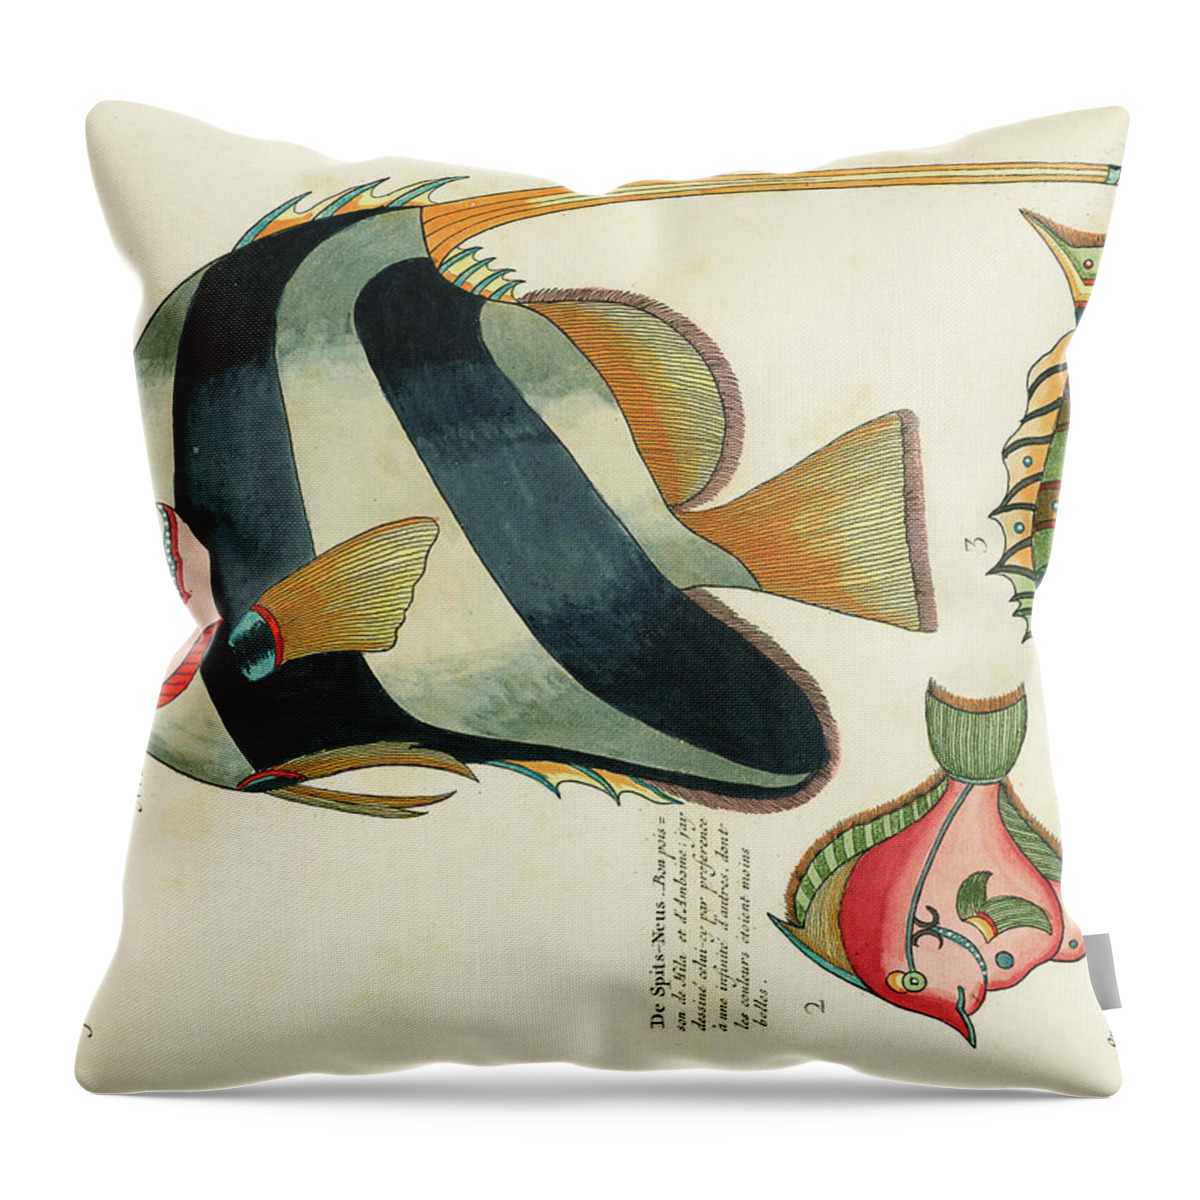 Fish Throw Pillow featuring the digital art Vintage, Whimsical Fish and Marine Life Illustration by Louis Renard - The Great Table Fish, Suangi by Studio Grafiikka